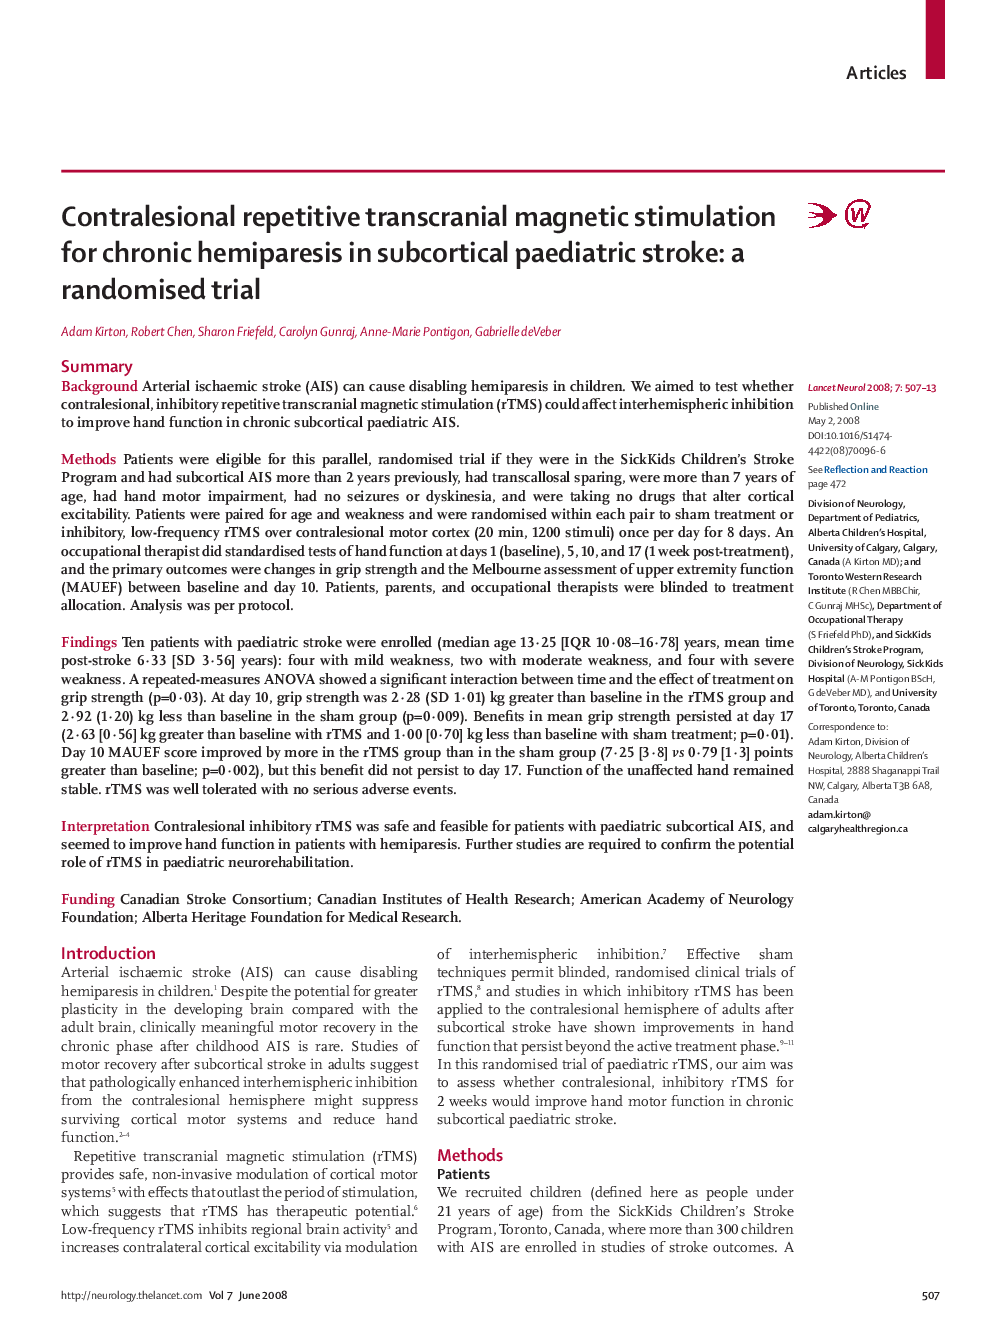 Contralesional repetitive transcranial magnetic stimulation for chronic hemiparesis in subcortical paediatric stroke: a randomised trial